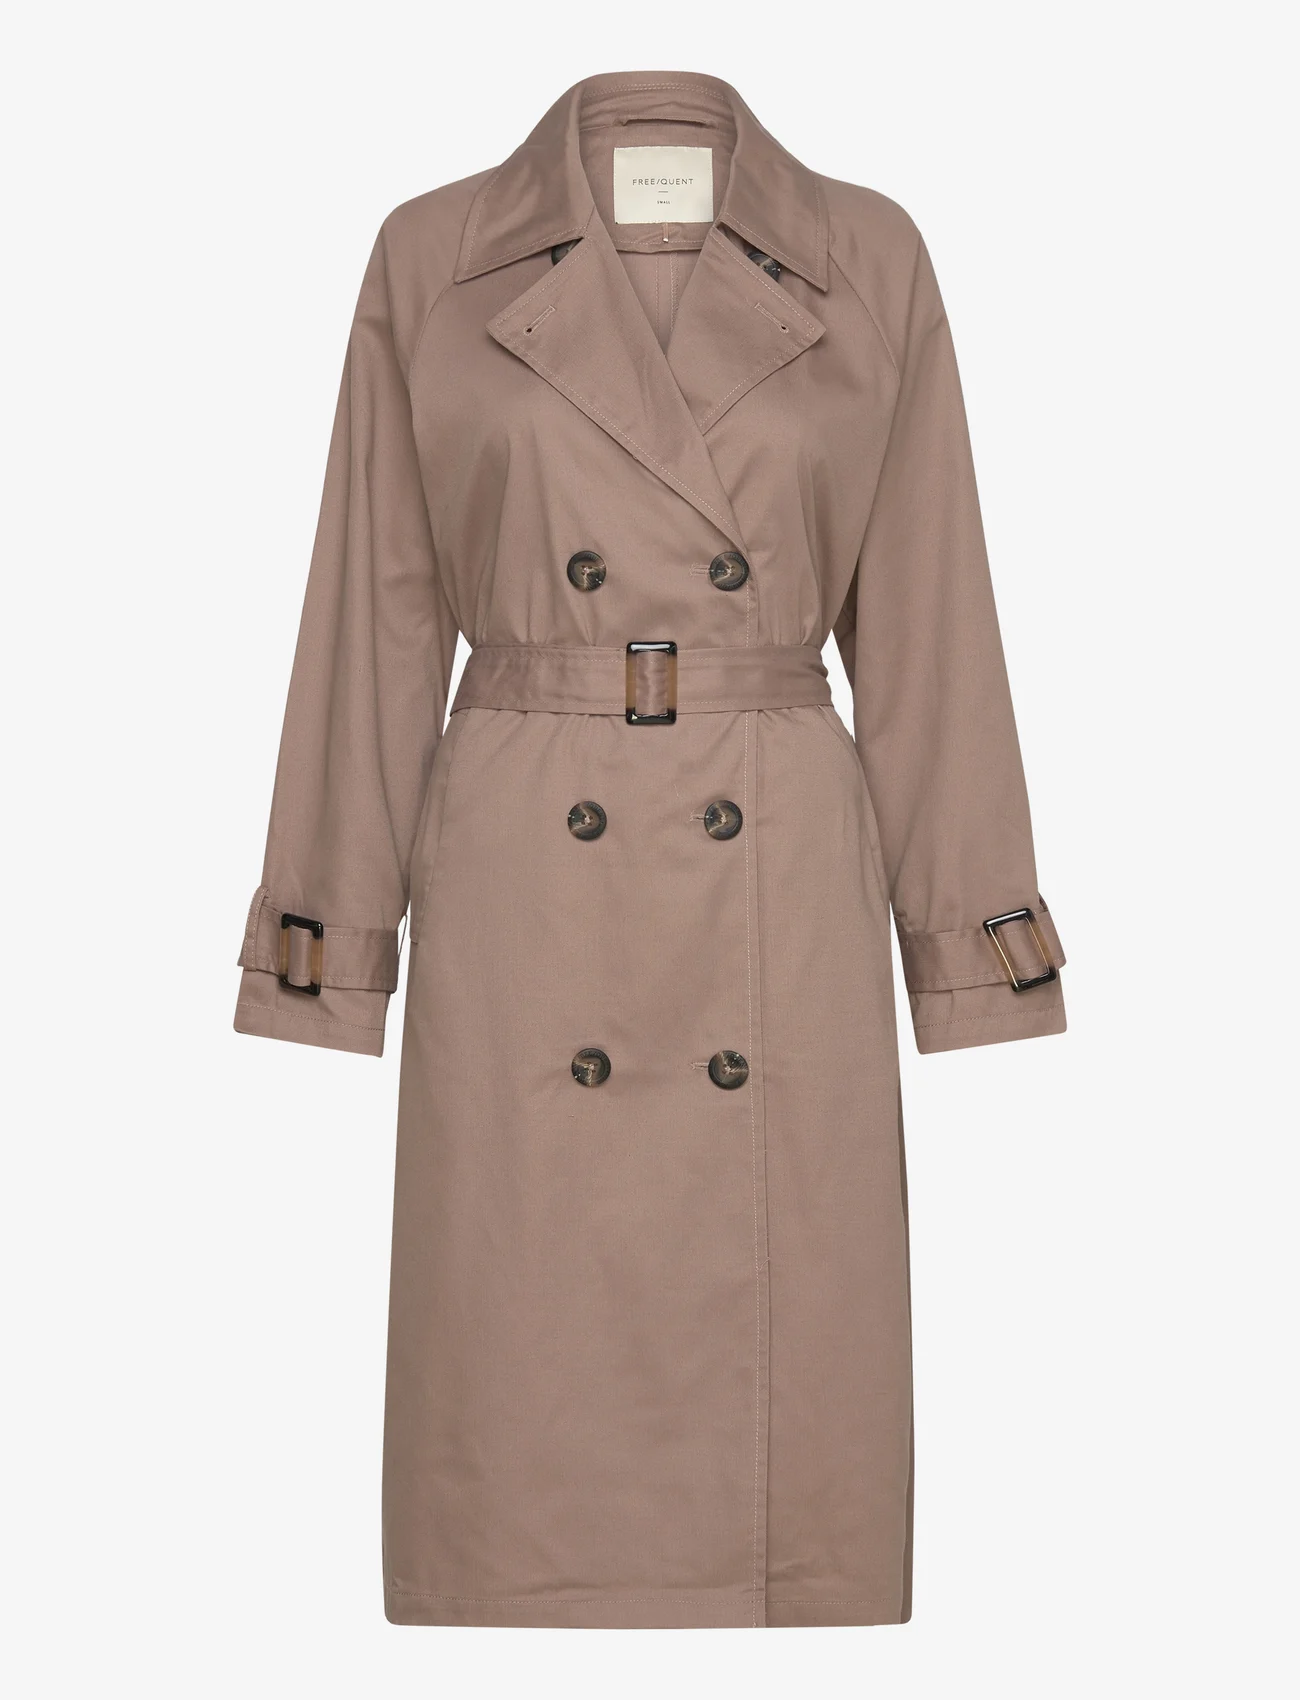 FREE/QUENT - FQTUKSY-JACKET - spring coats - taupe gray - 1